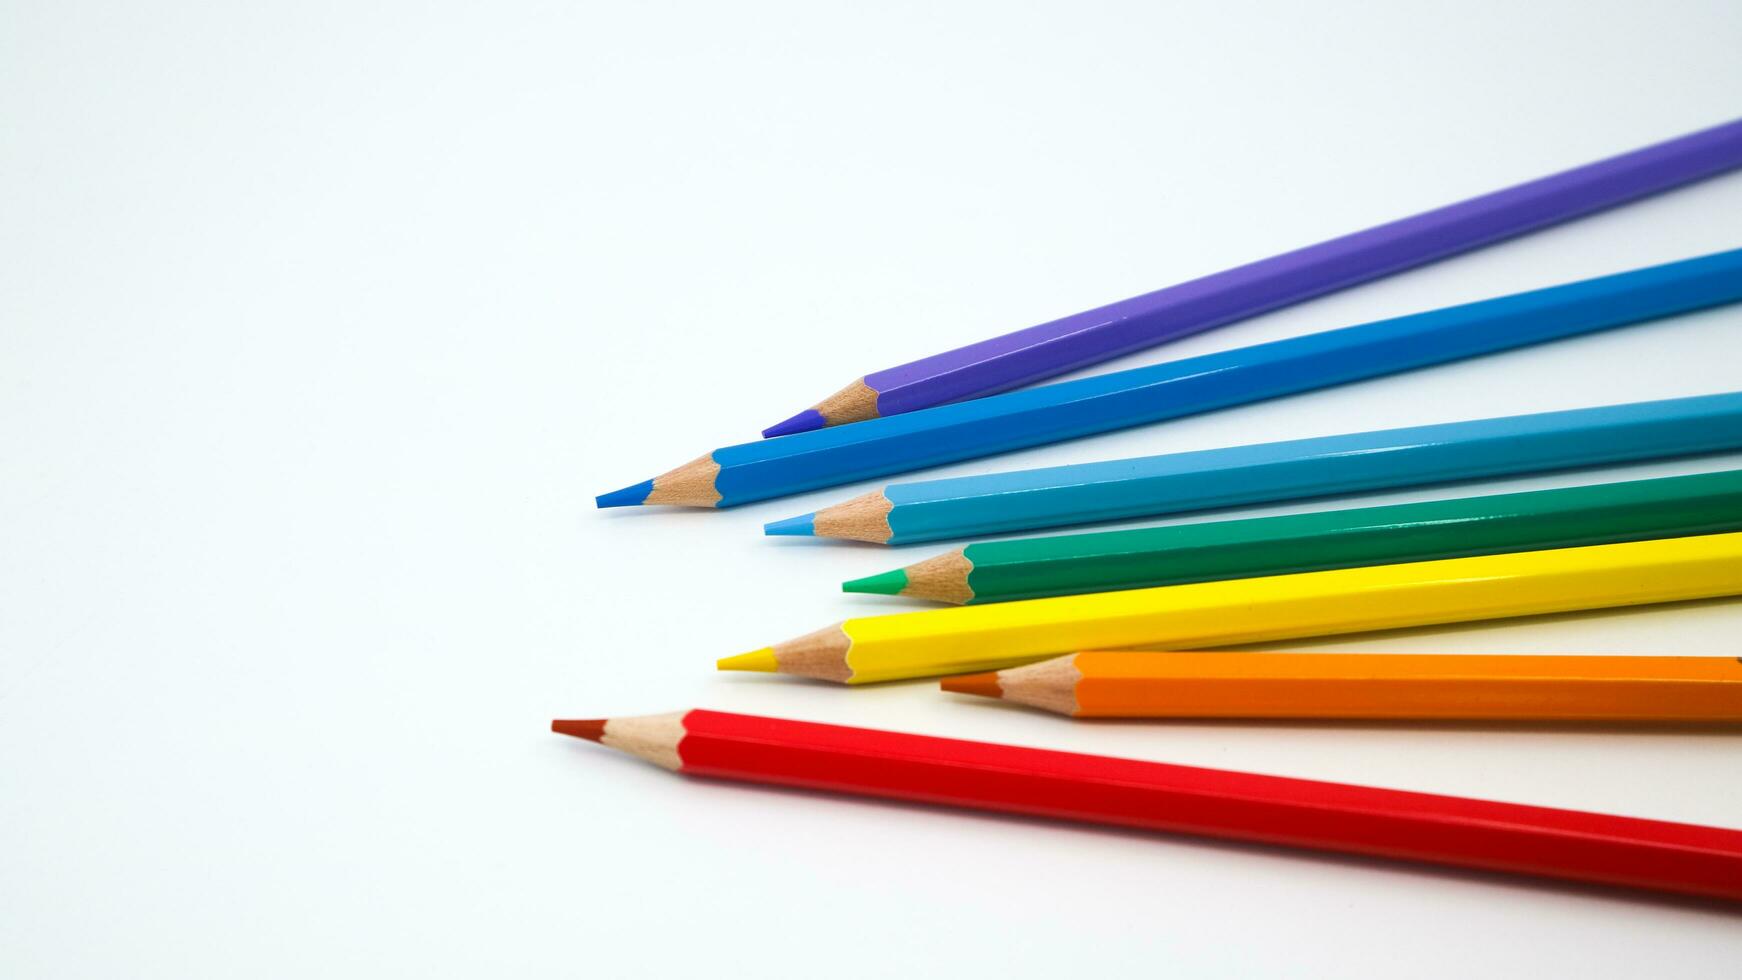 Many different colored pencils on white background photo